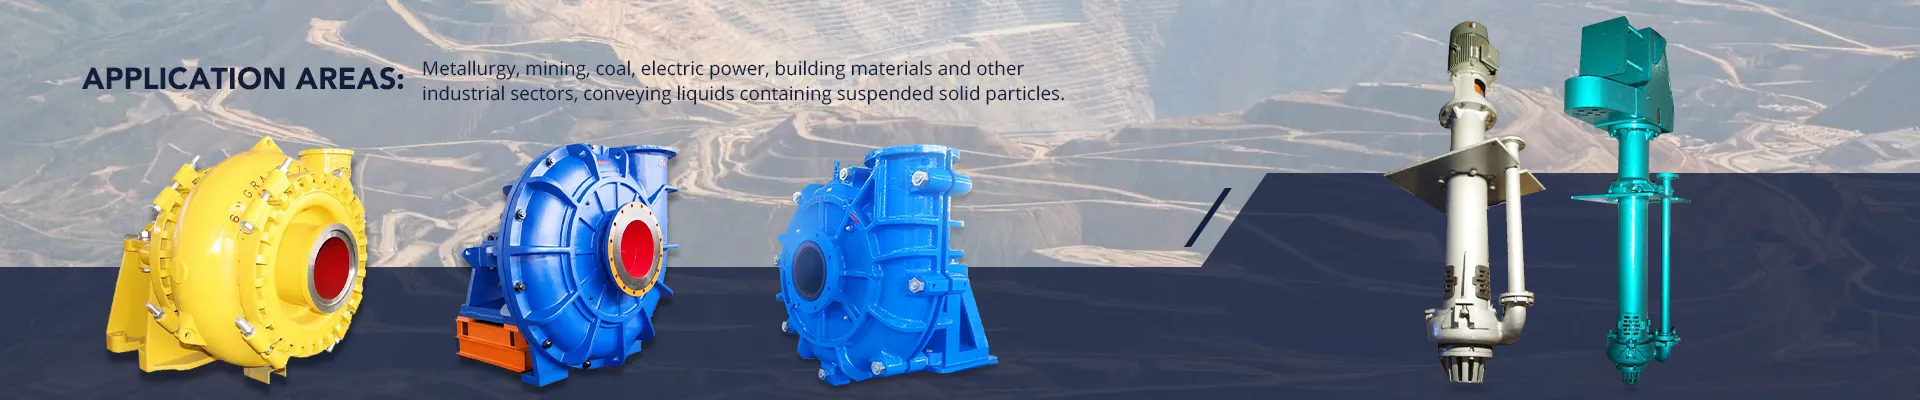 Double Shell Slurry Pump Series